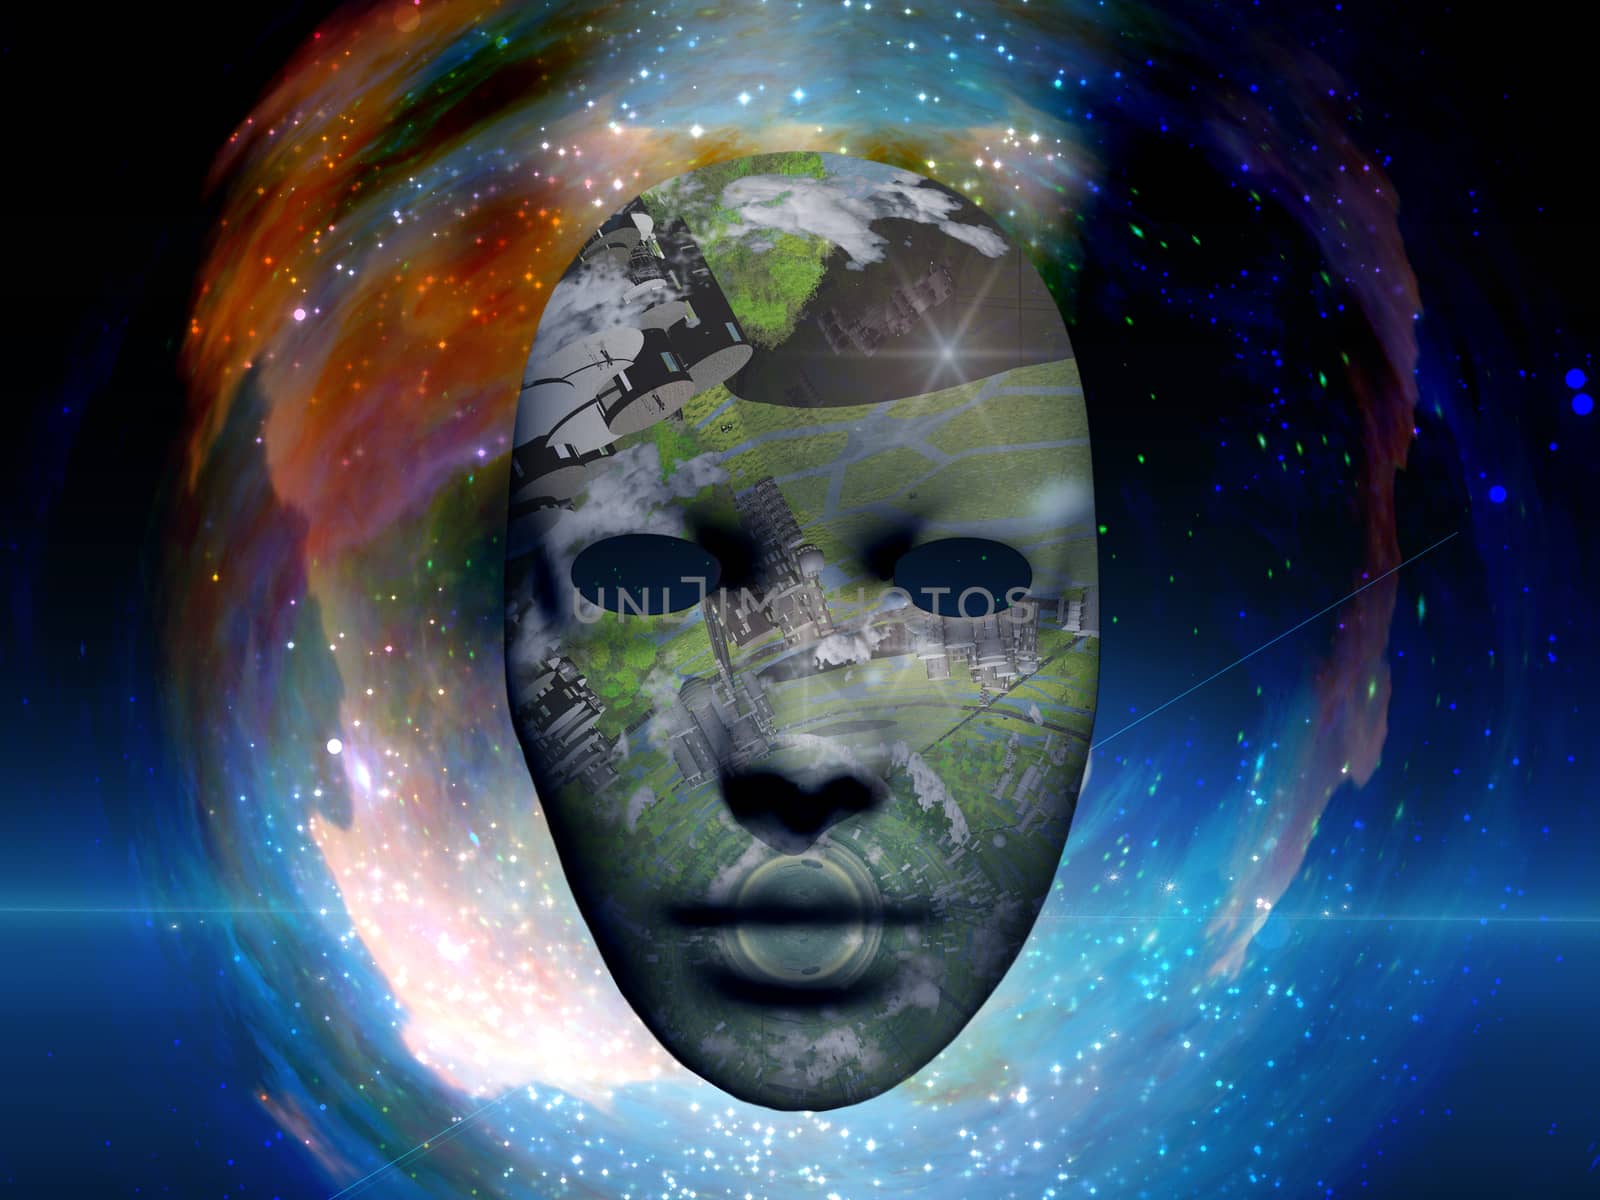 Mask with the image of O'Neill cylinder. Colorful universe on background.